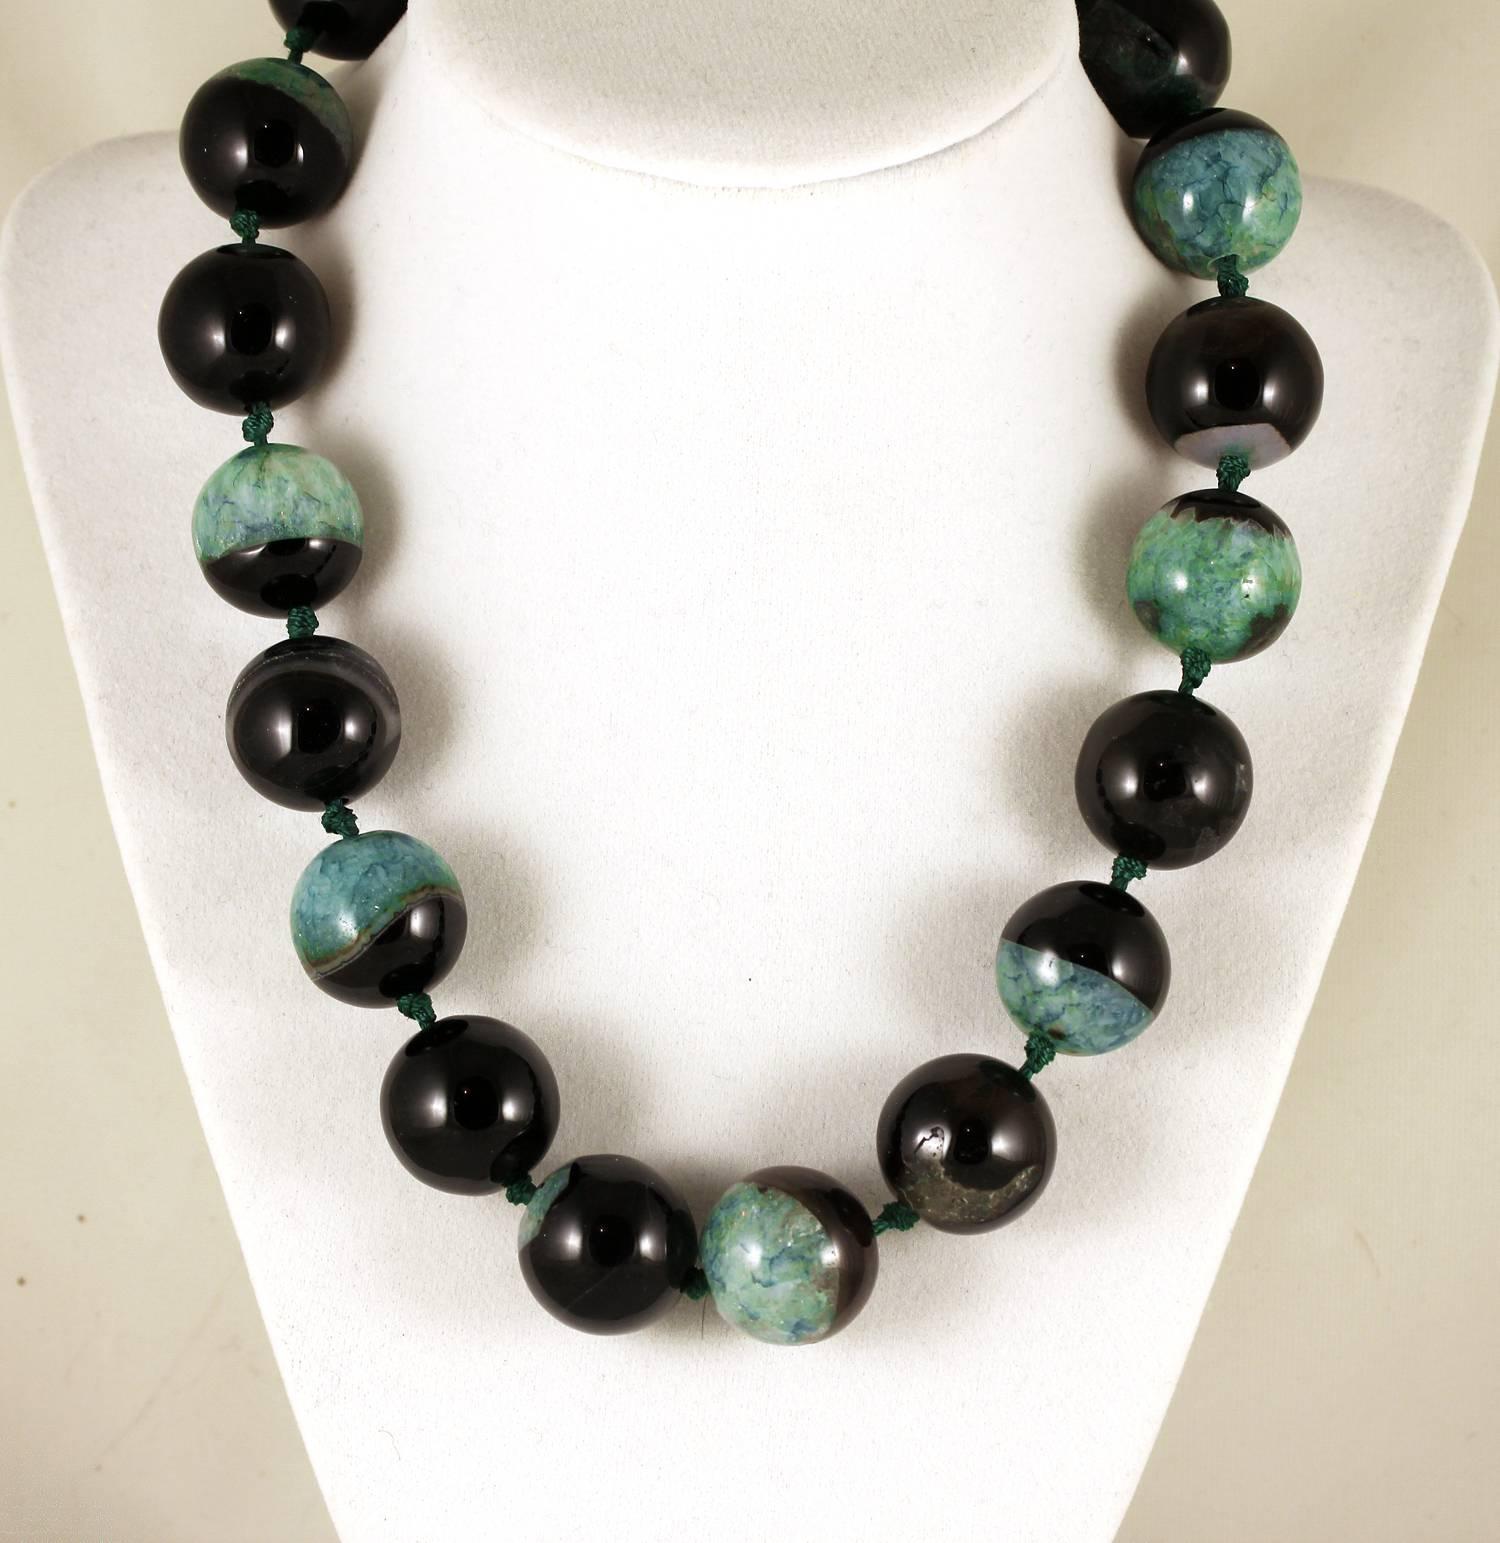 Large round highly polished translucent greenish-blue and black natural Agate many of them very translucent Necklace
Size: Agates approximately 20 mm
Length: 18 inches
Clasp: Silver tone